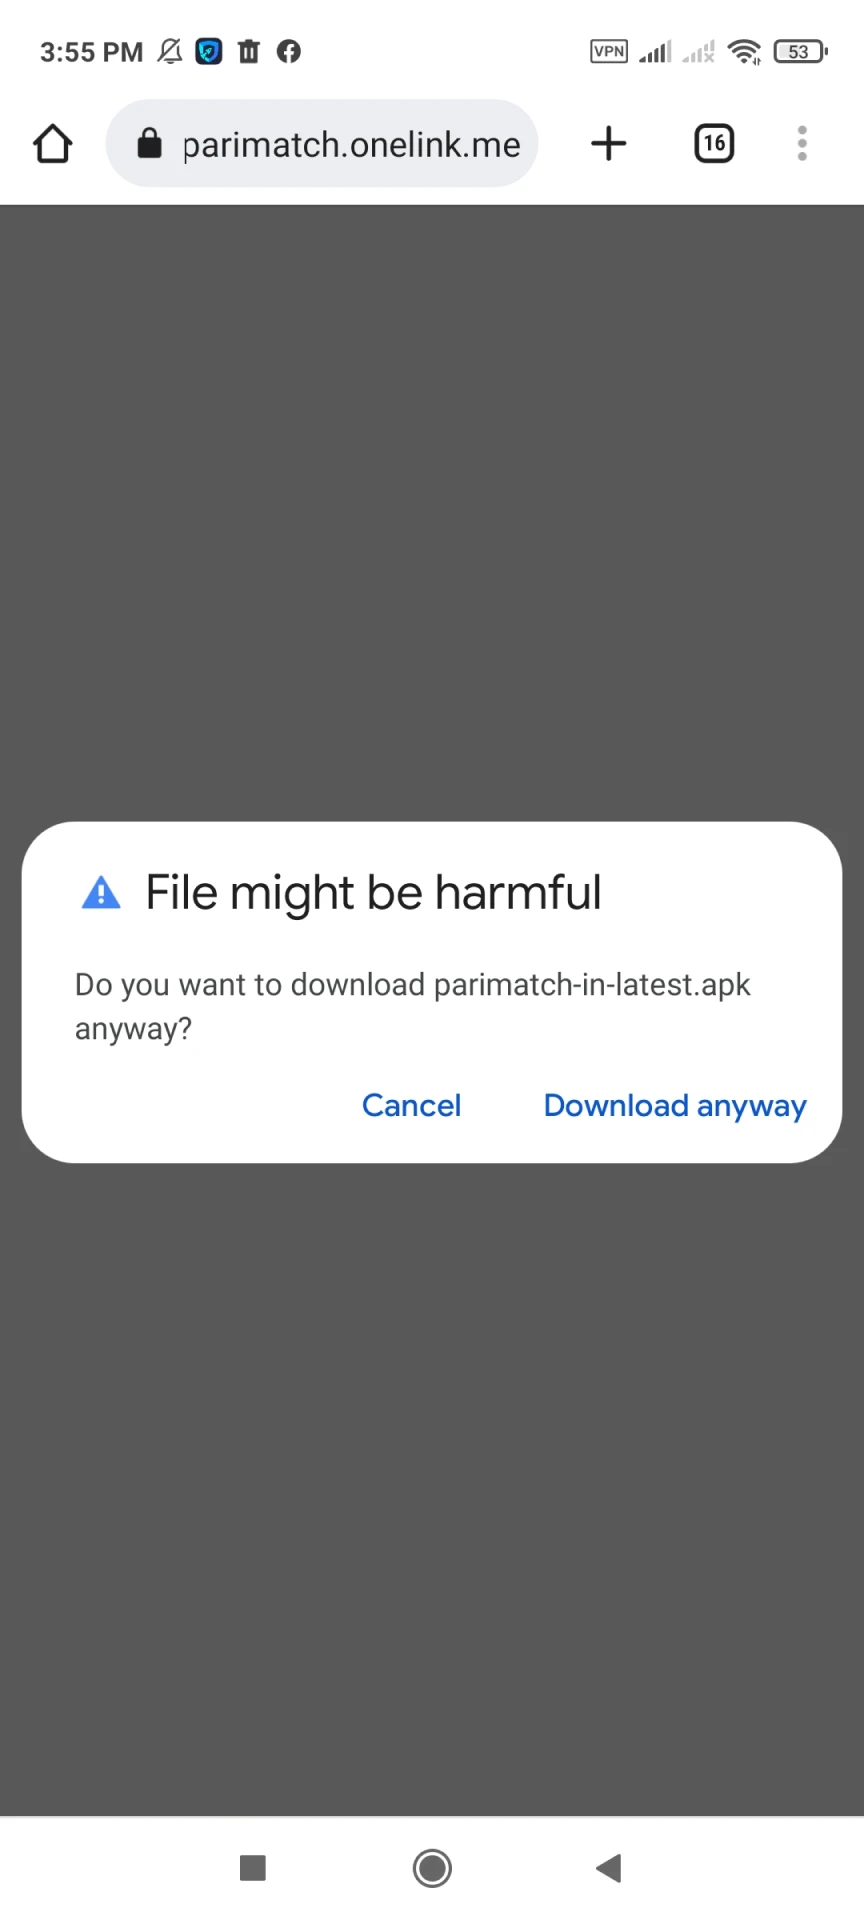 Confirm the download of the Parimatch app on your smartphone.